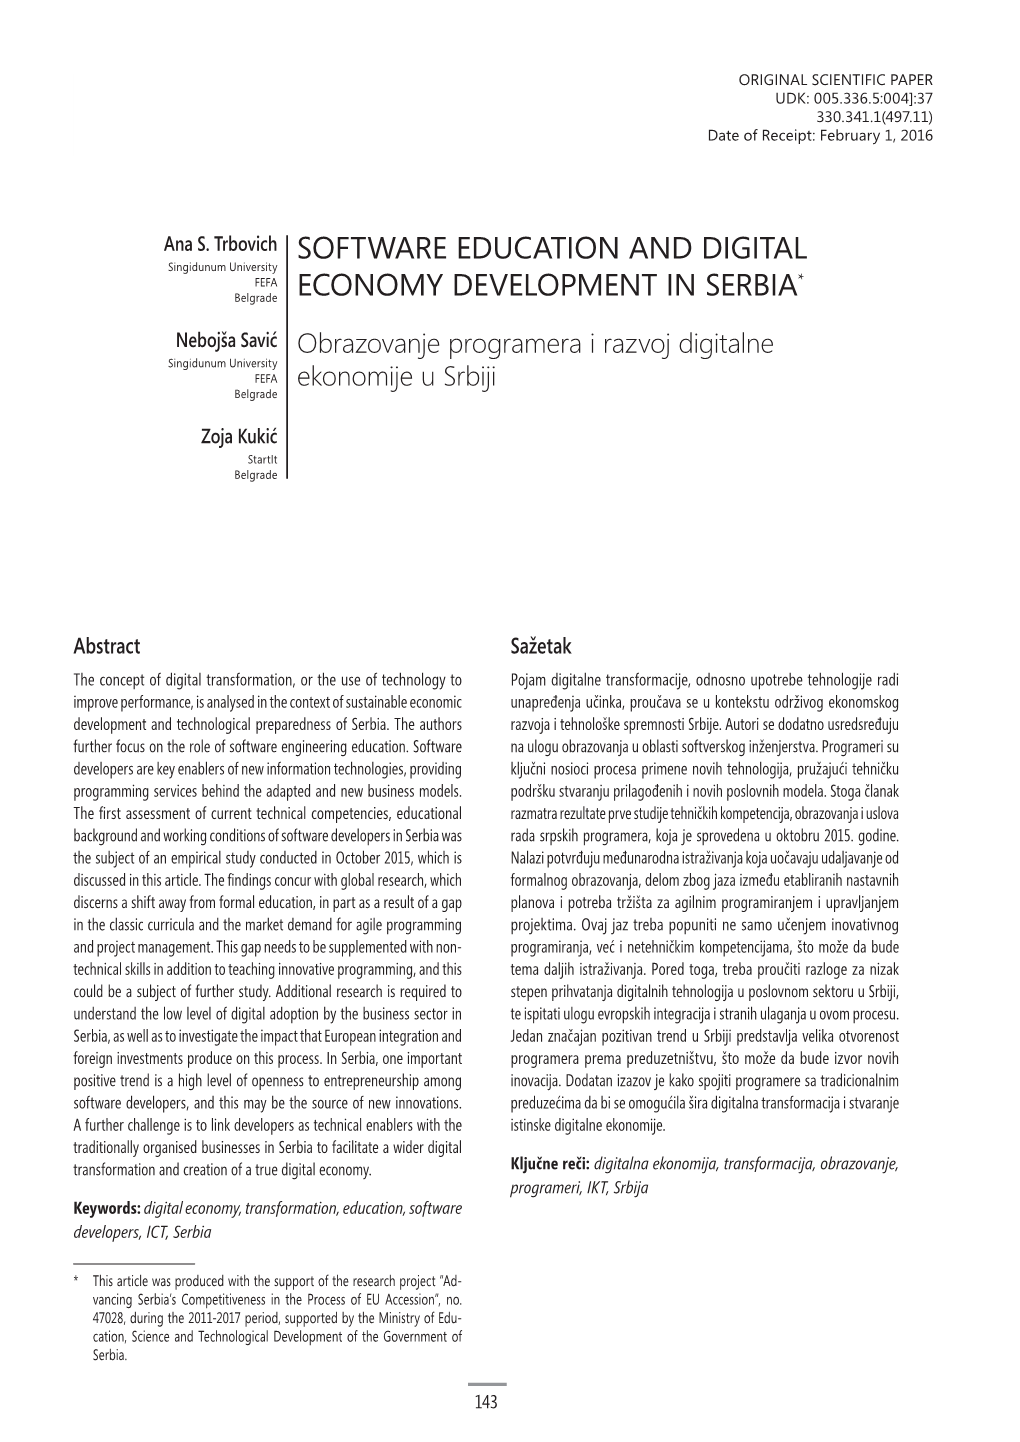 Software Education and Digital ECONOMY DEVELOPMENT IN